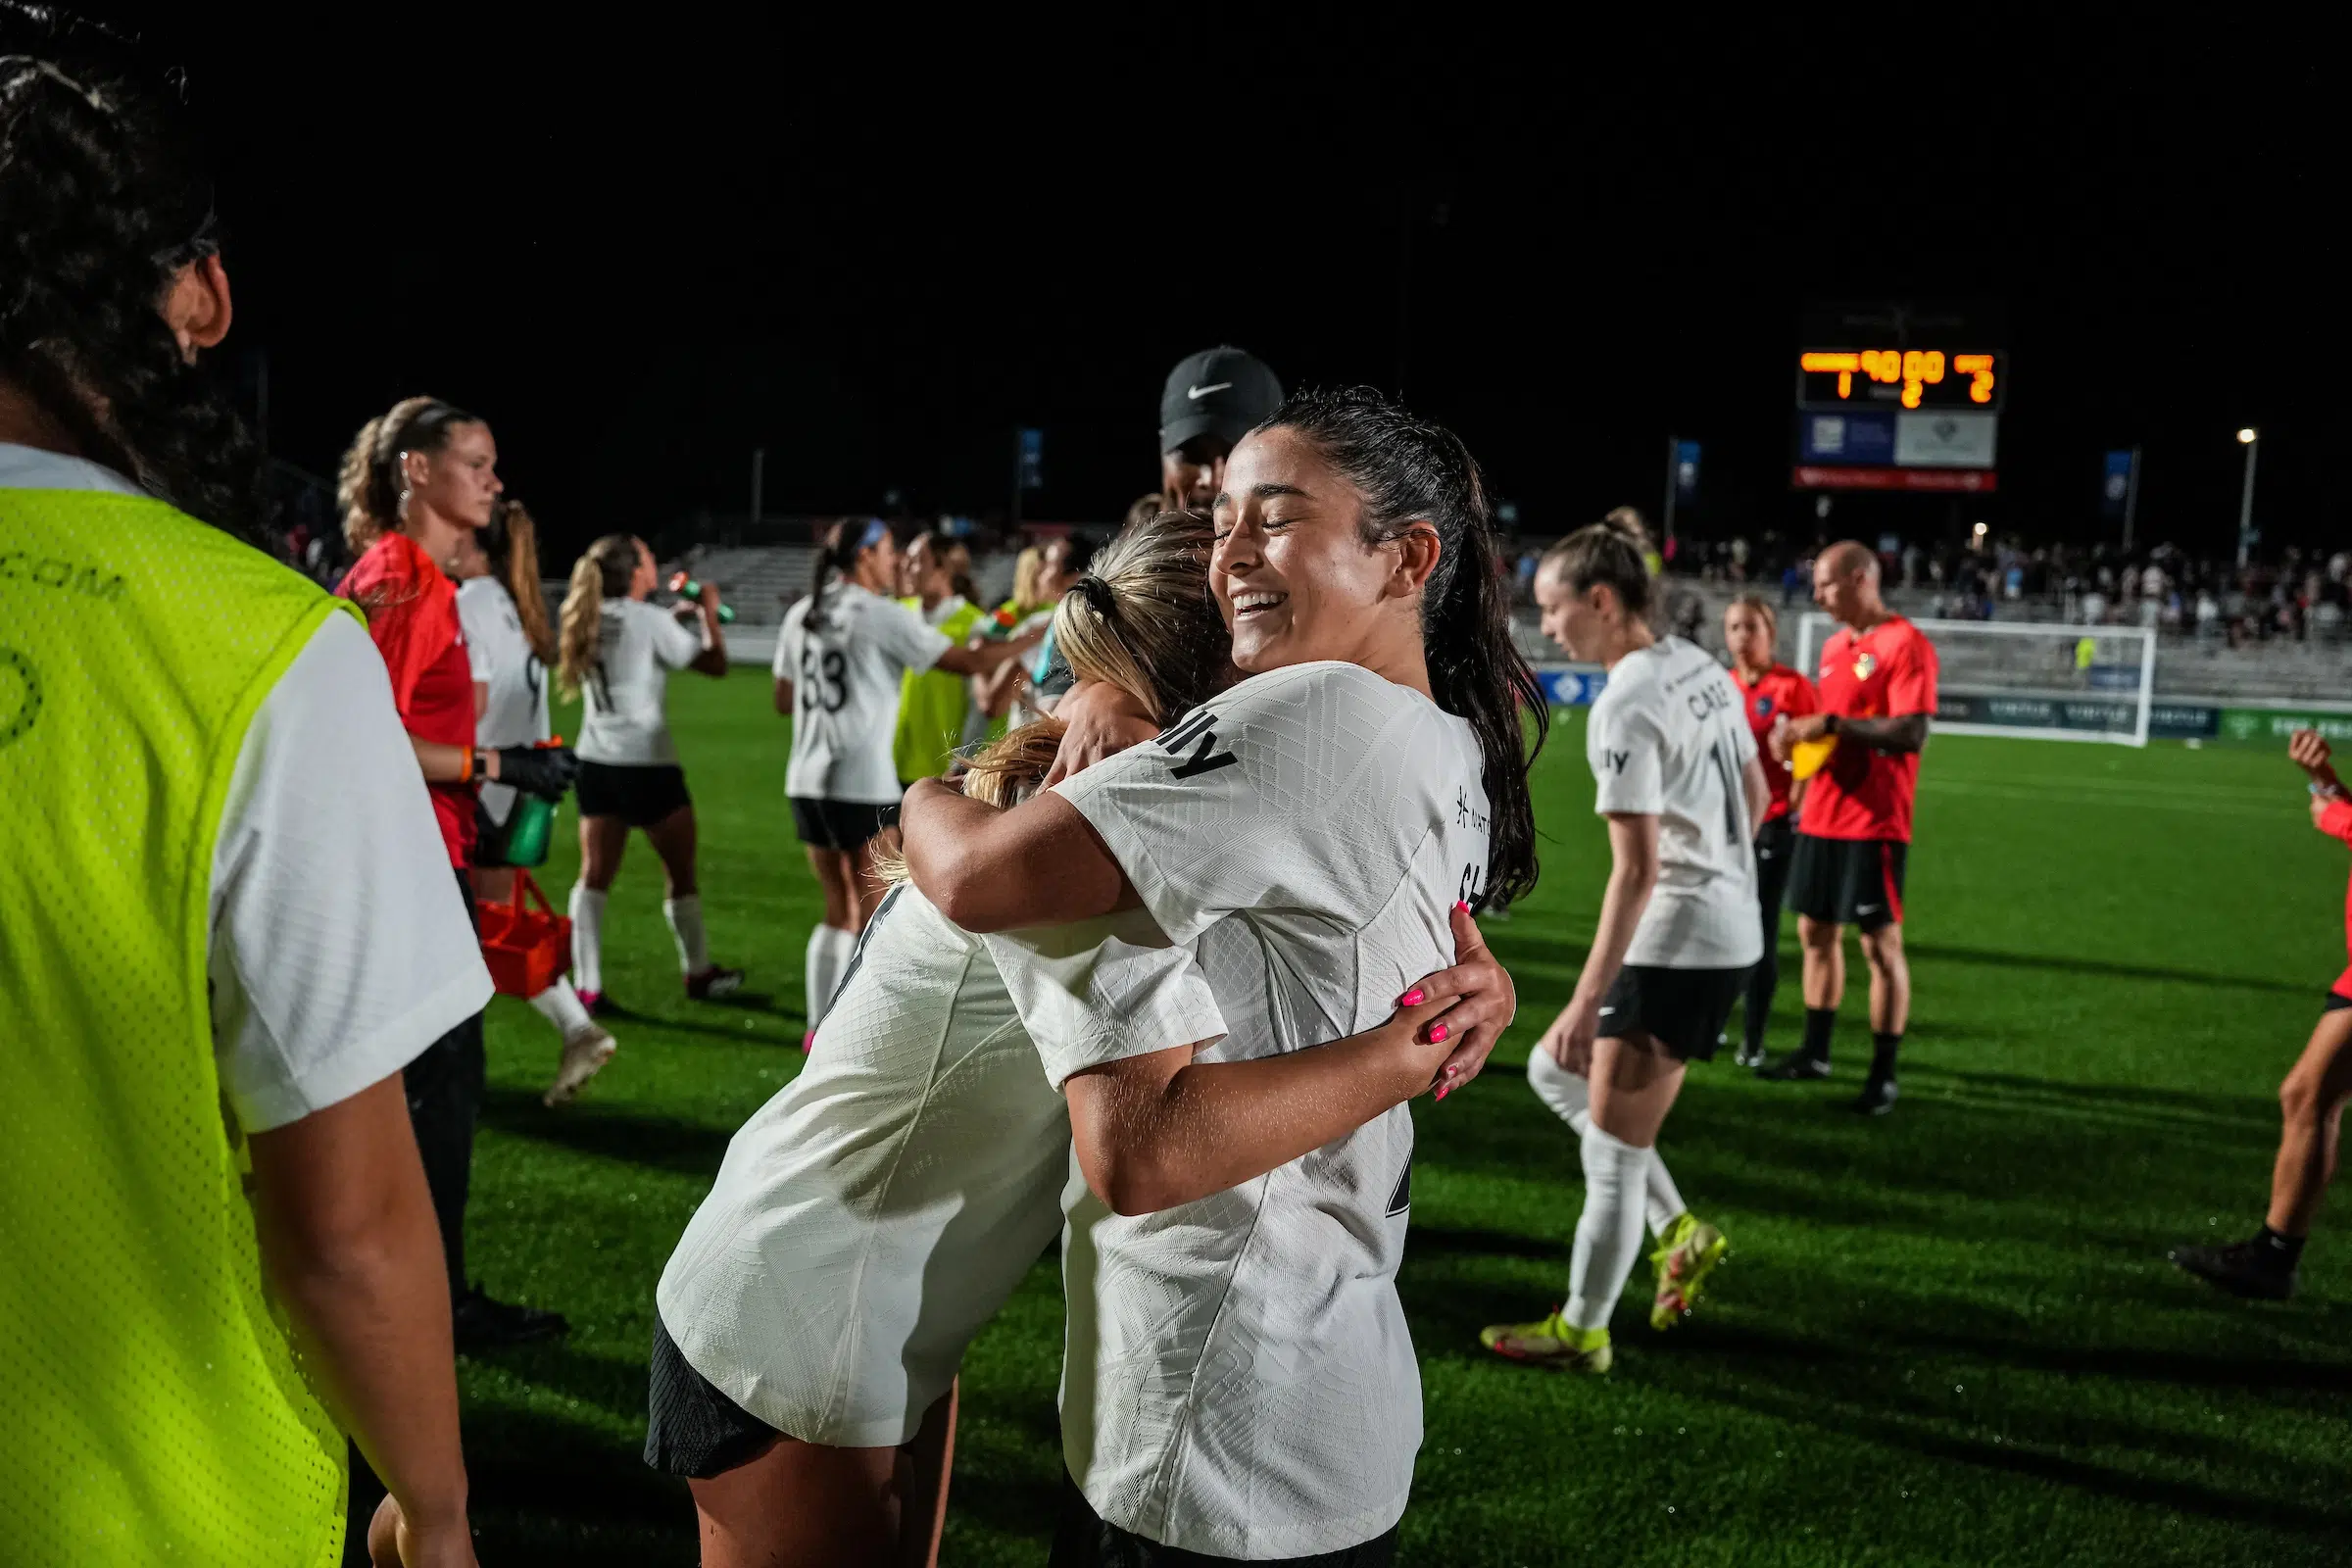 Two soccer players in white tops and black shorts embrace and smile. In the background, an out-of-focus scoreboard shows the final score of 2 - 1.